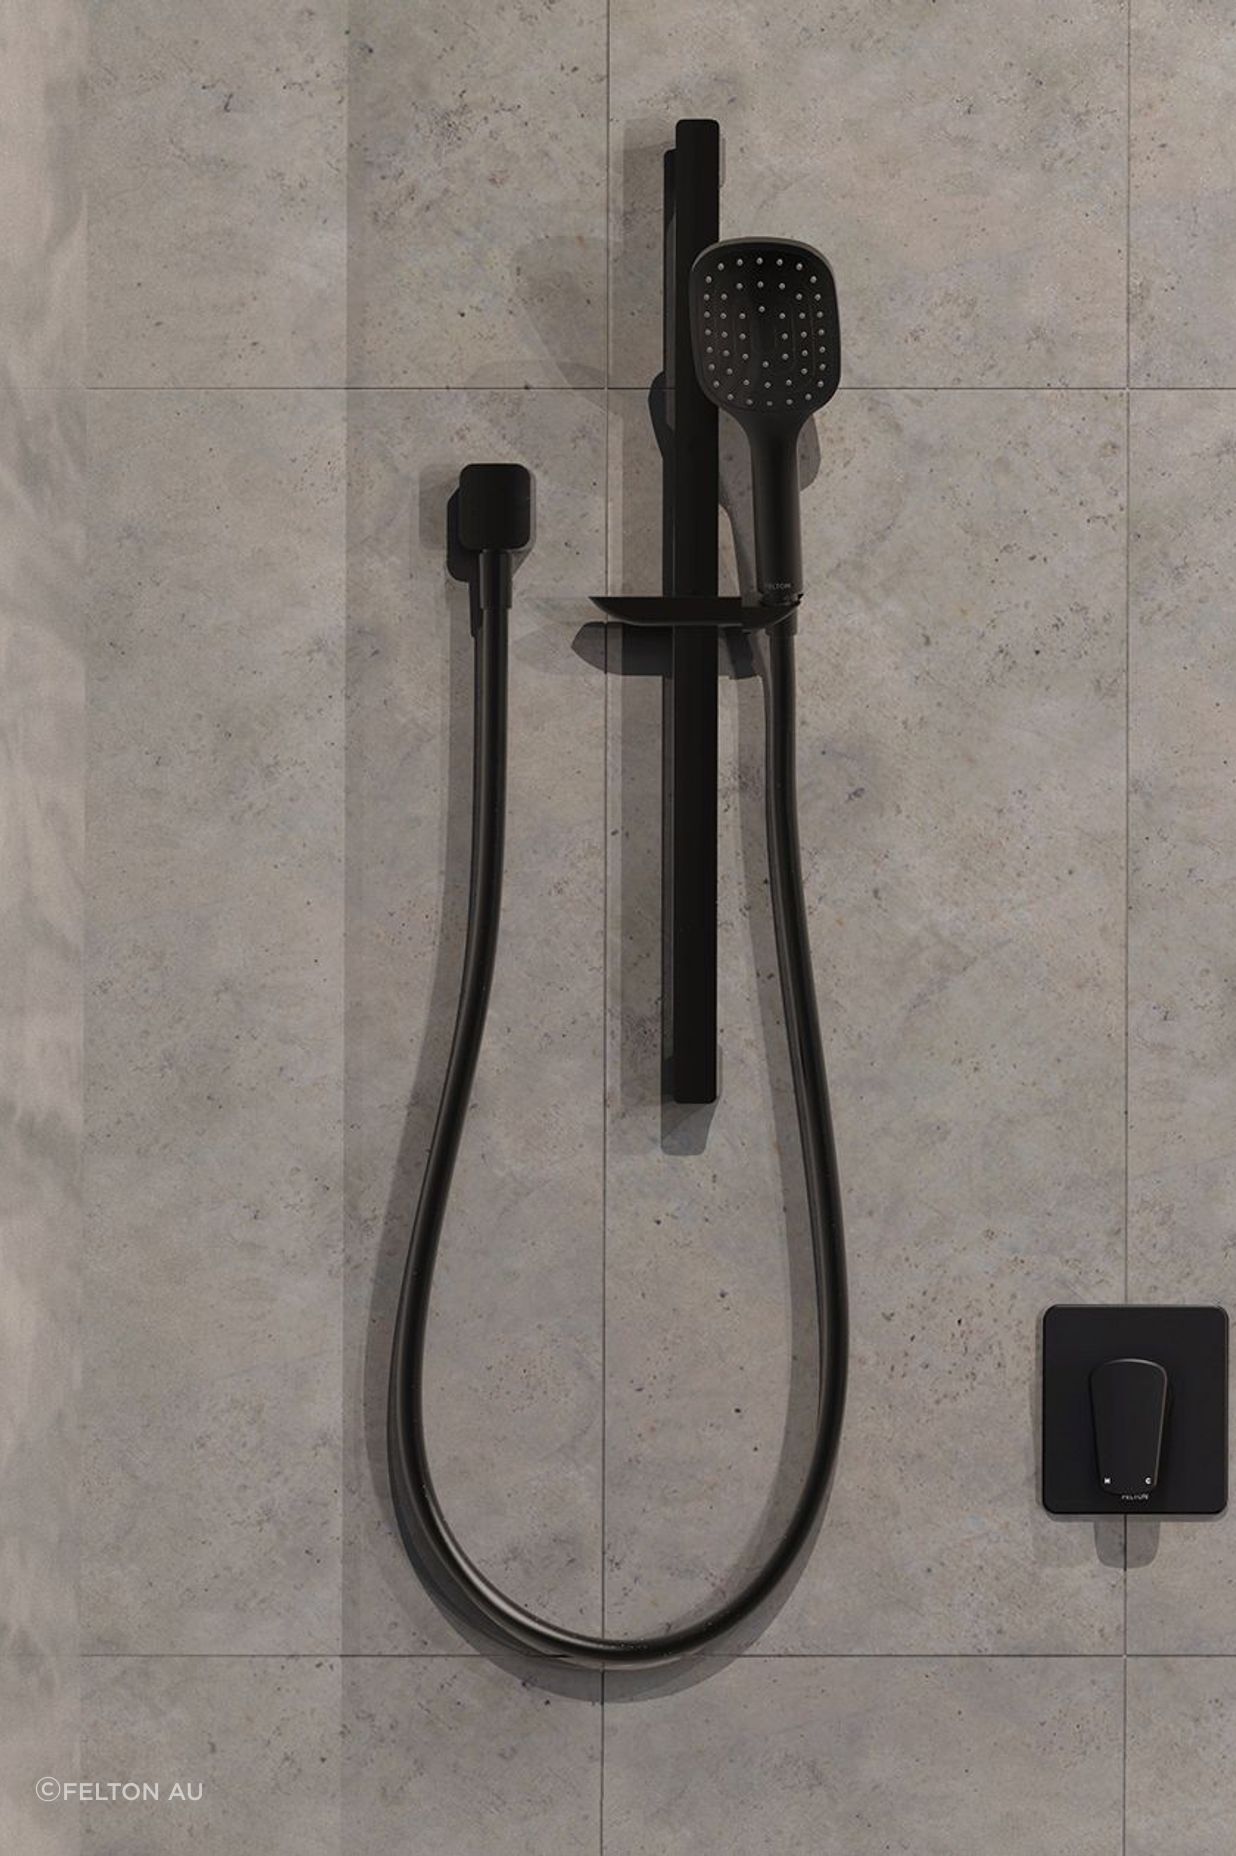 Adjustable showers can be attached to a variety of different shower arms. Featured product: Axiss II Single Spray Slide Shower